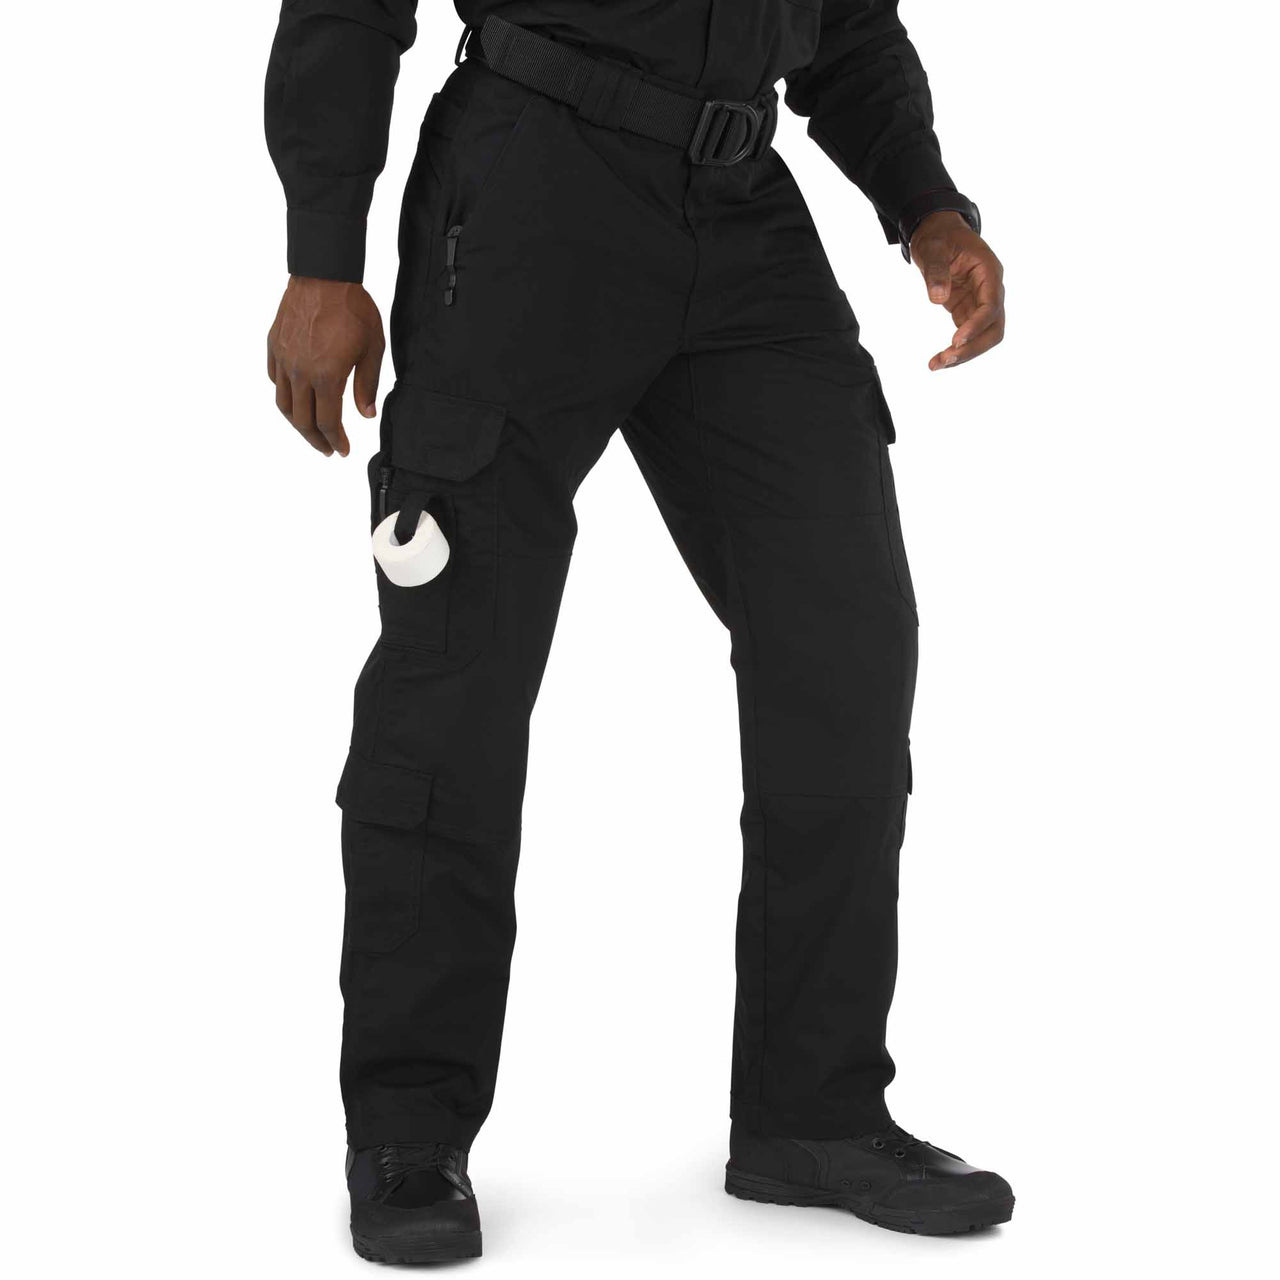 5.11 Tactical TACLITE® EMS Pant (74363)) | The Fire Center | Fuego Fire Center |  A warm weather alternative to our traditional twill EMS Pants, 5.11®'s TACLITE® EMS Pants are lightweight, breathable, and durable. Made from our TACLITE® ripstop fabric, these pants feature a self- adjusting waistband, fully gusseted inseam, and double- reinforced seat and knees for comfort and mobility.